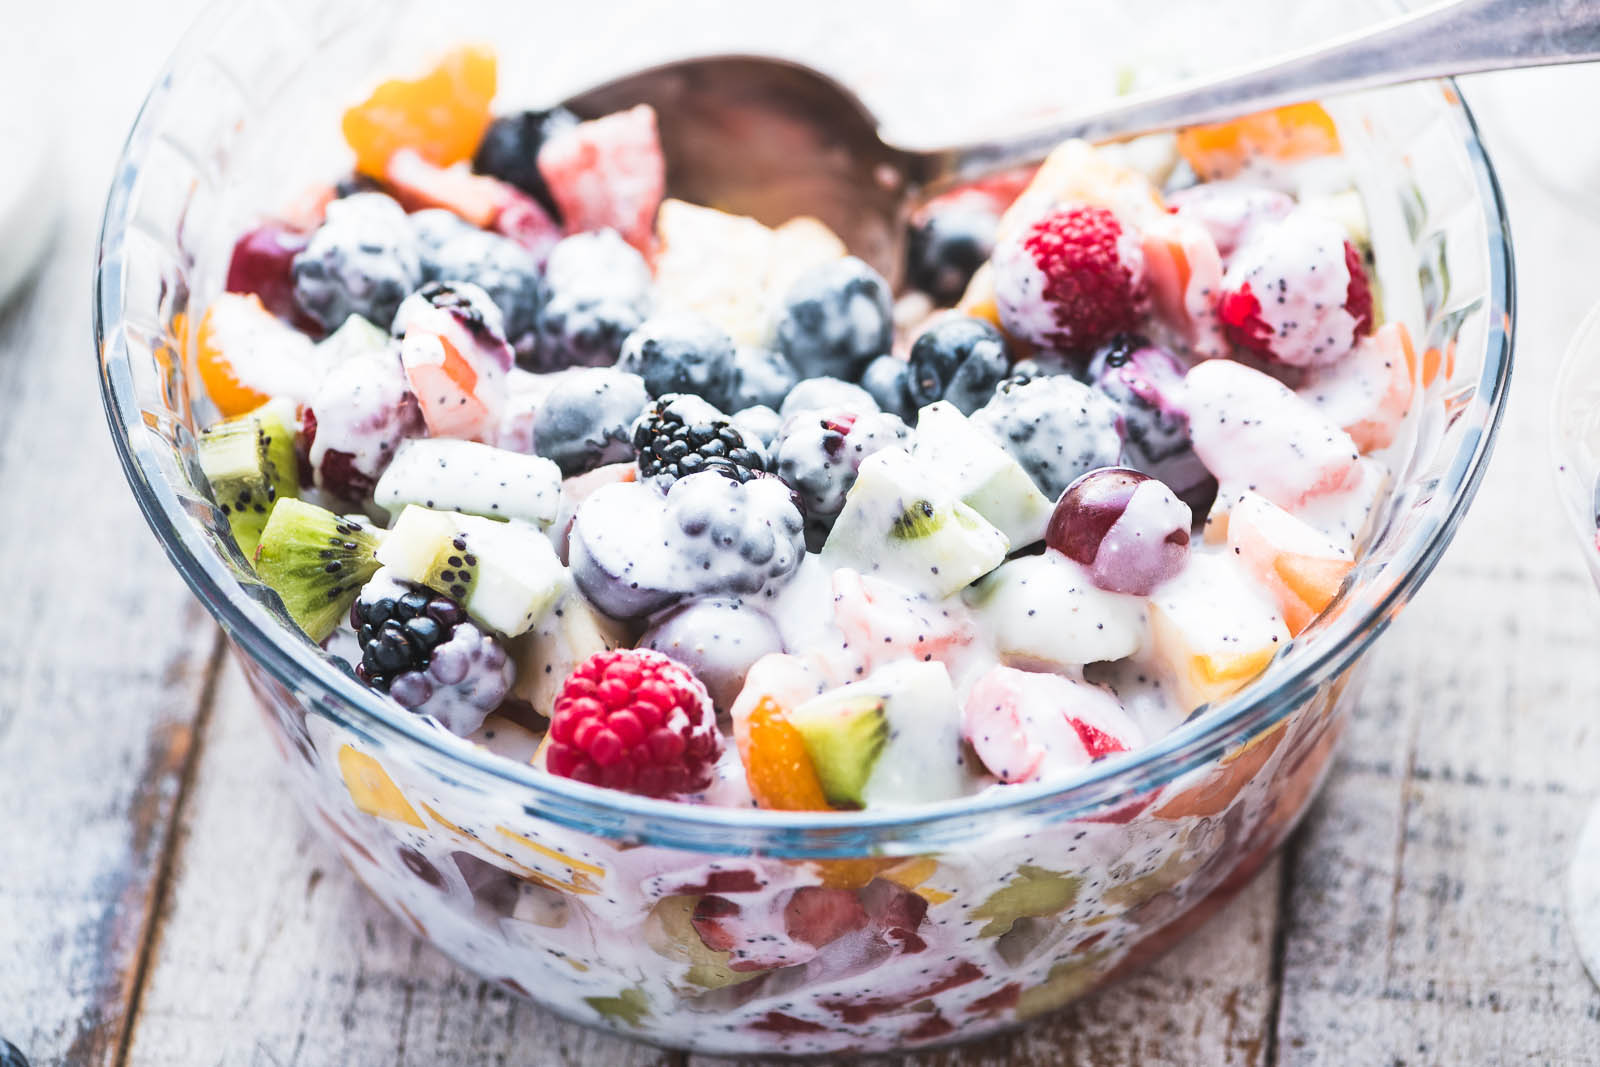 Say “Yuck” Or “Yum” to These Foods and We’ll Determine Your Exact Age Fruit salad